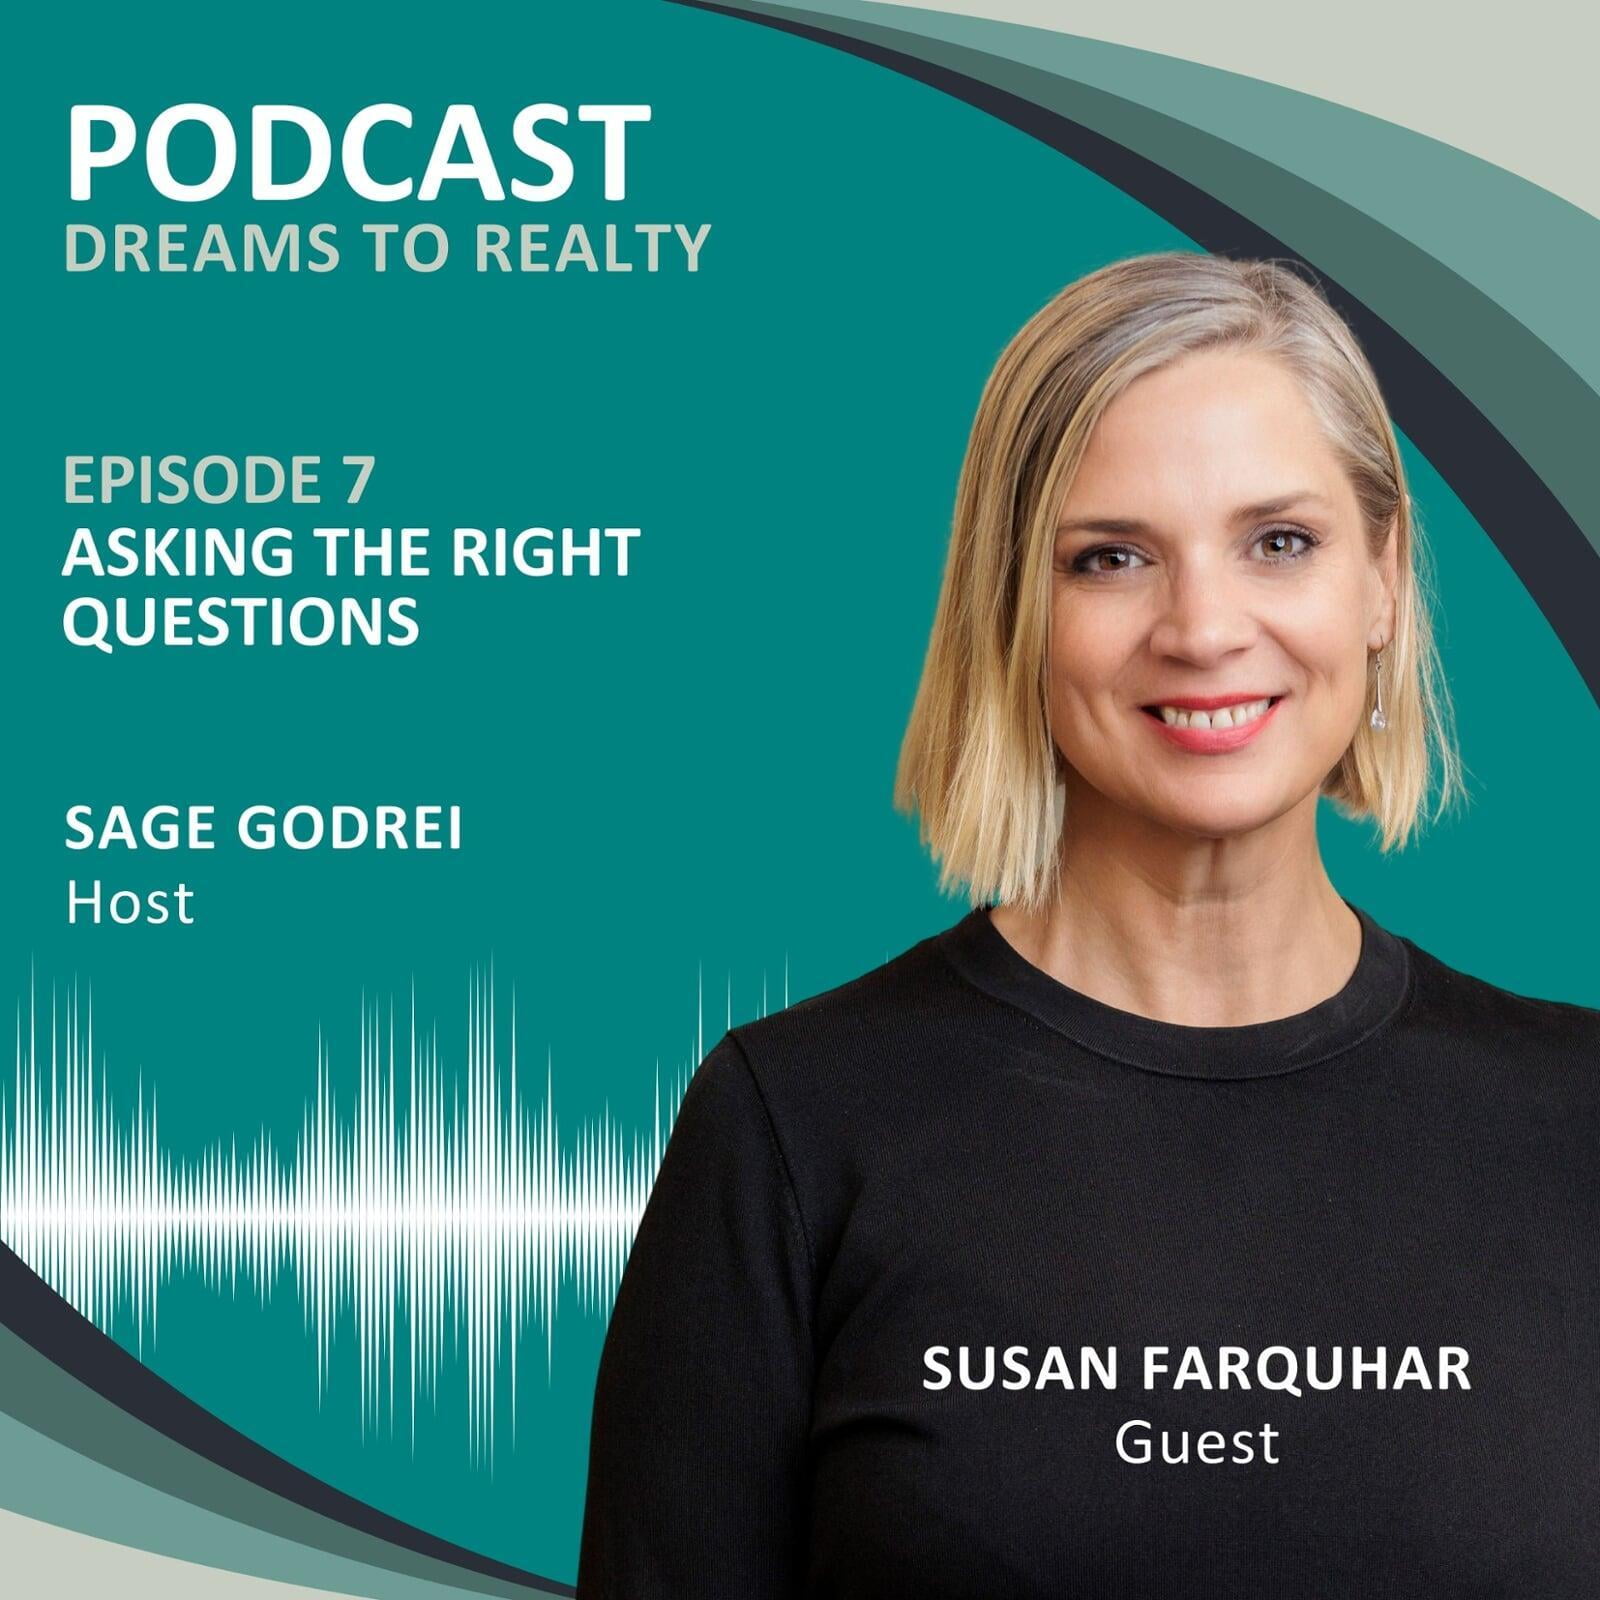 PODCAST: Dreams To Realty Property Investment Insights - Episode 7 Asking The Right Questions